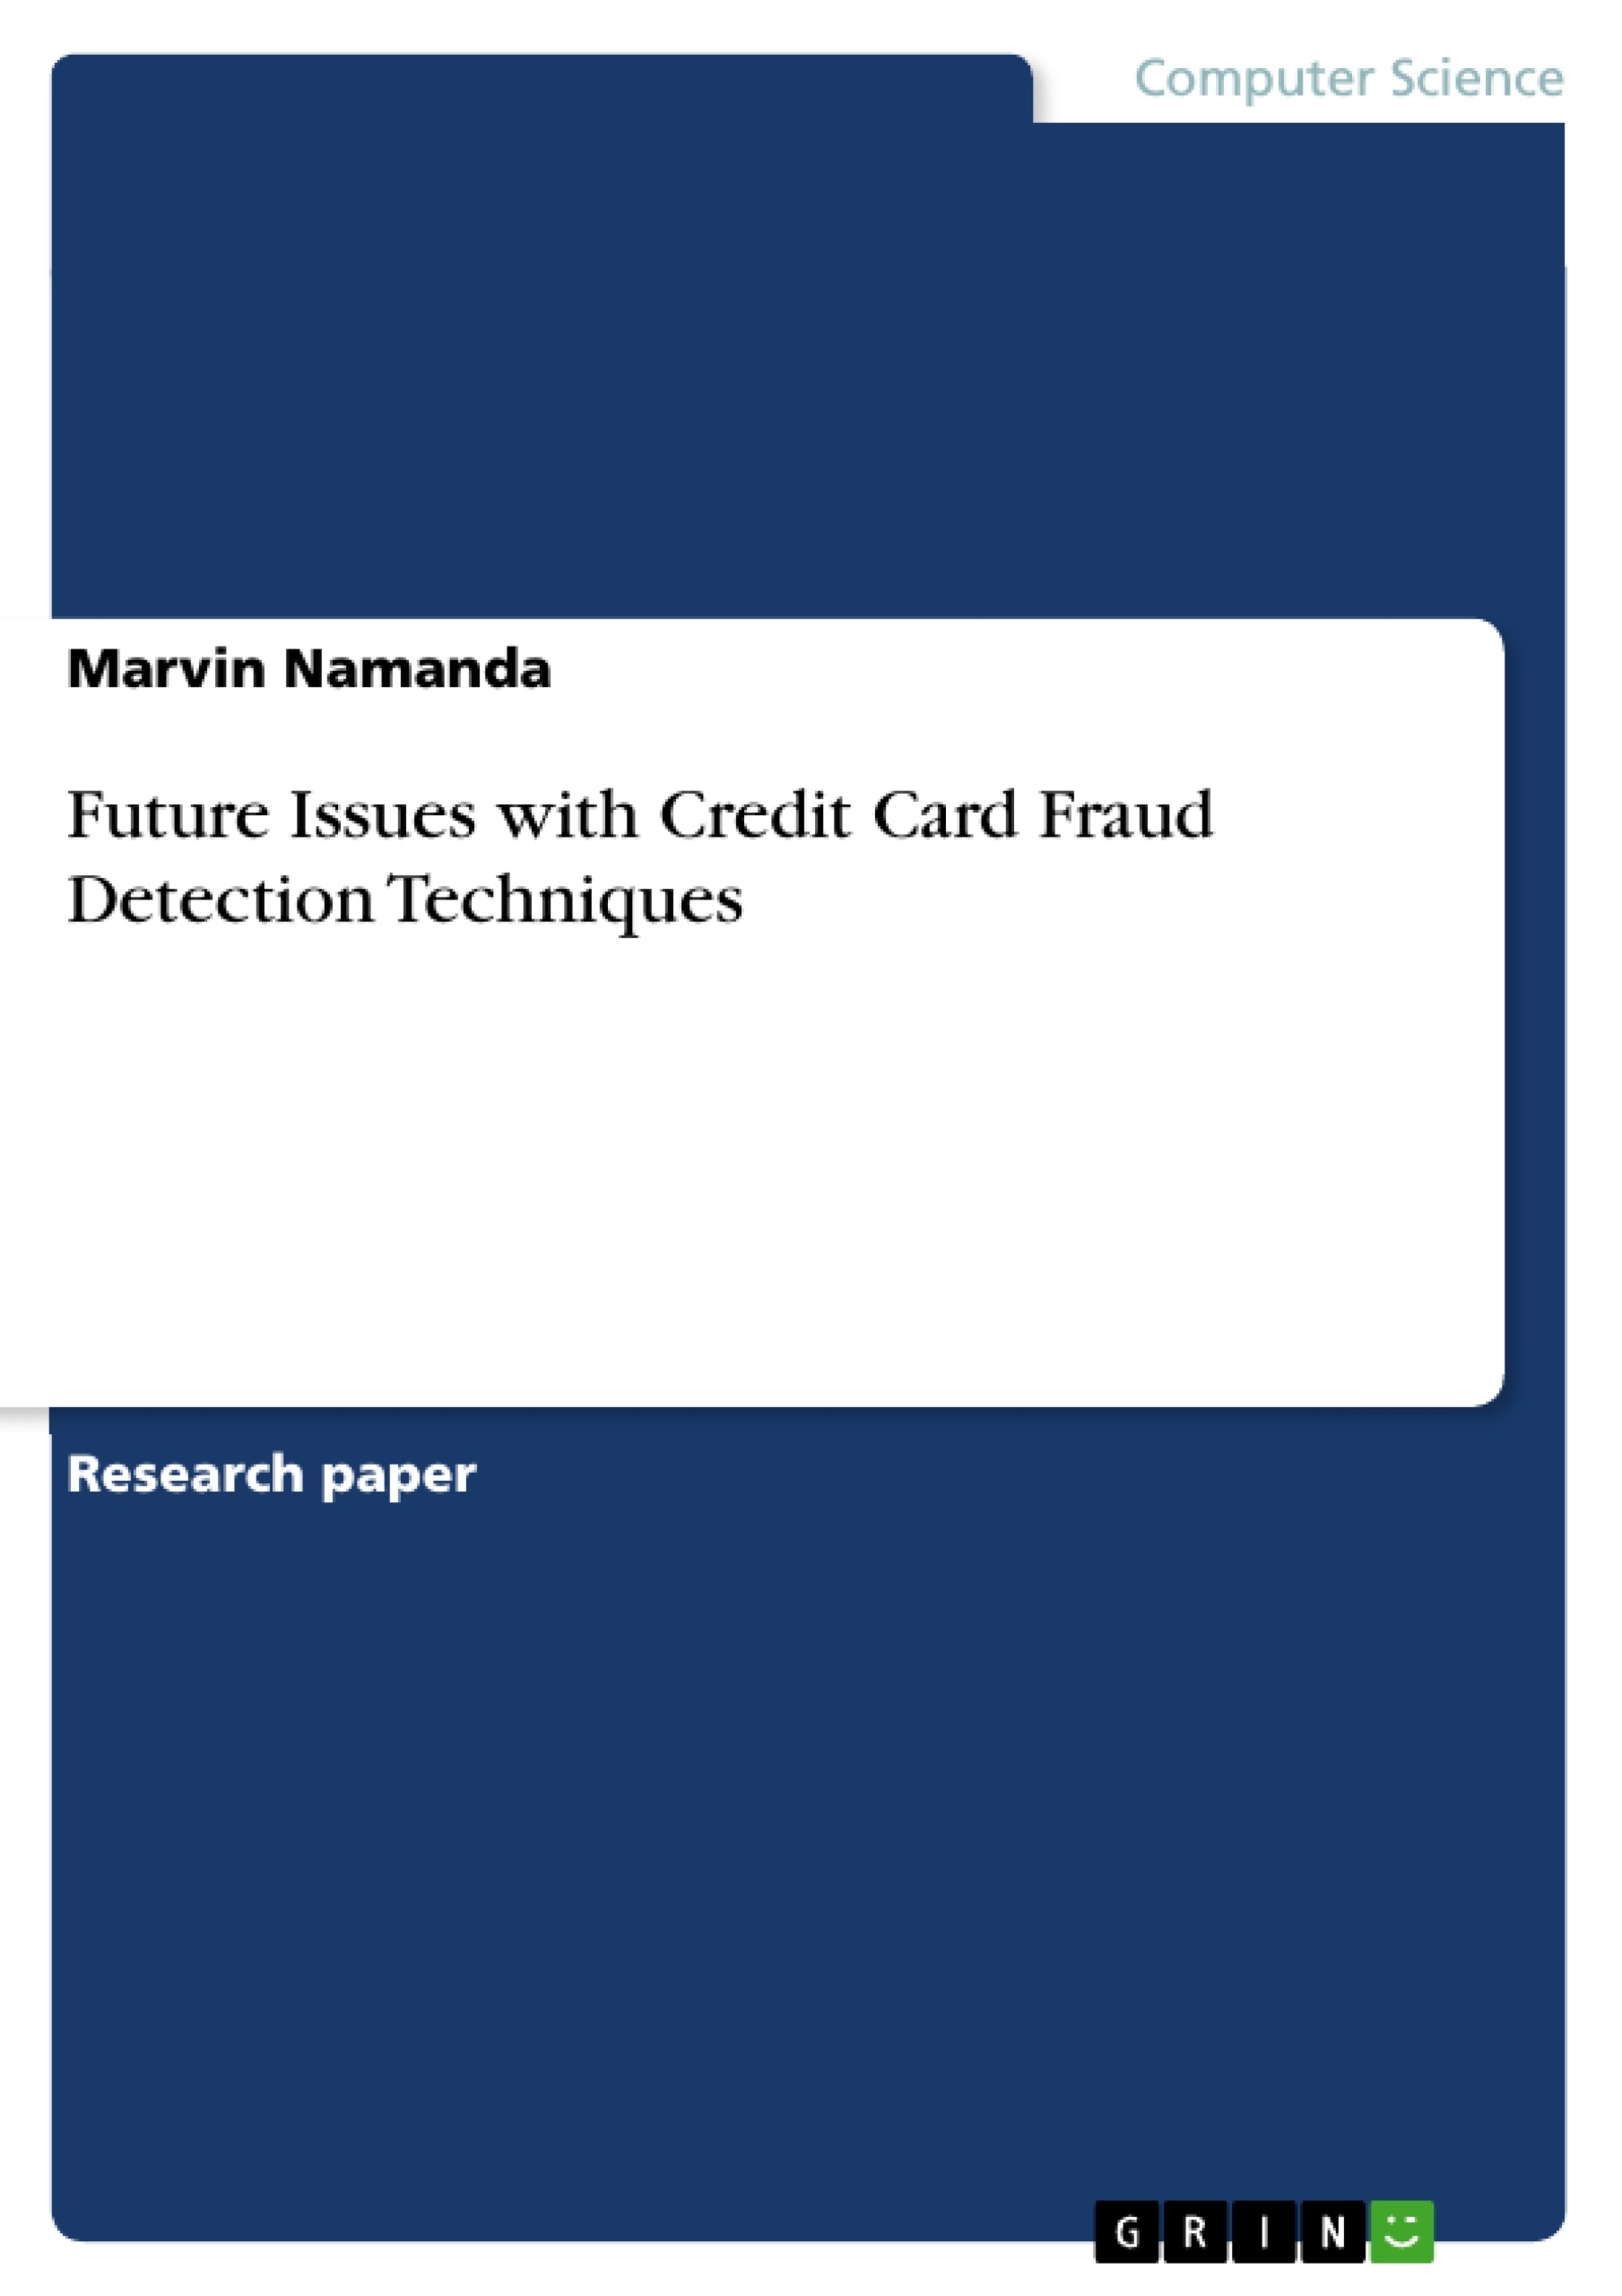 Title: Future Issues with Credit Card Fraud Detection Techniques